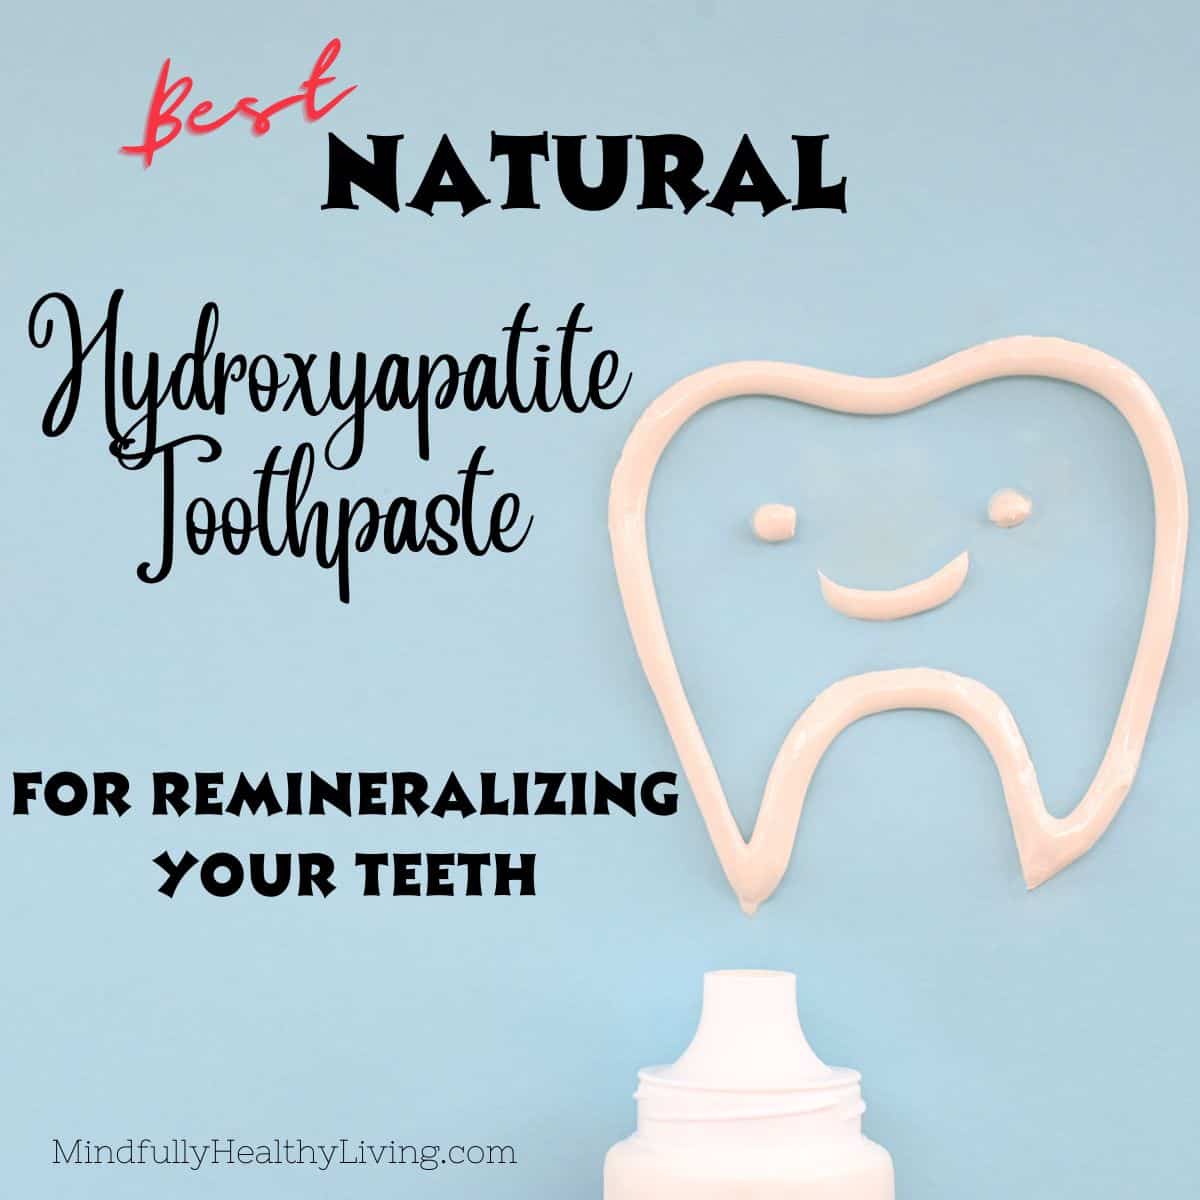 A blue backdrop has a tip of a white toothpaste tube showing making it appear to have just drawn an outline of a tooth with a smiling face inside of it with toothpaste. There is writing in red cursive that reads "BEST" and in black that reads "Natural Hydroxyapatite Toothpaste for Remineralizing Your Teeth". The bottom says mindfullyhealthyliving.com